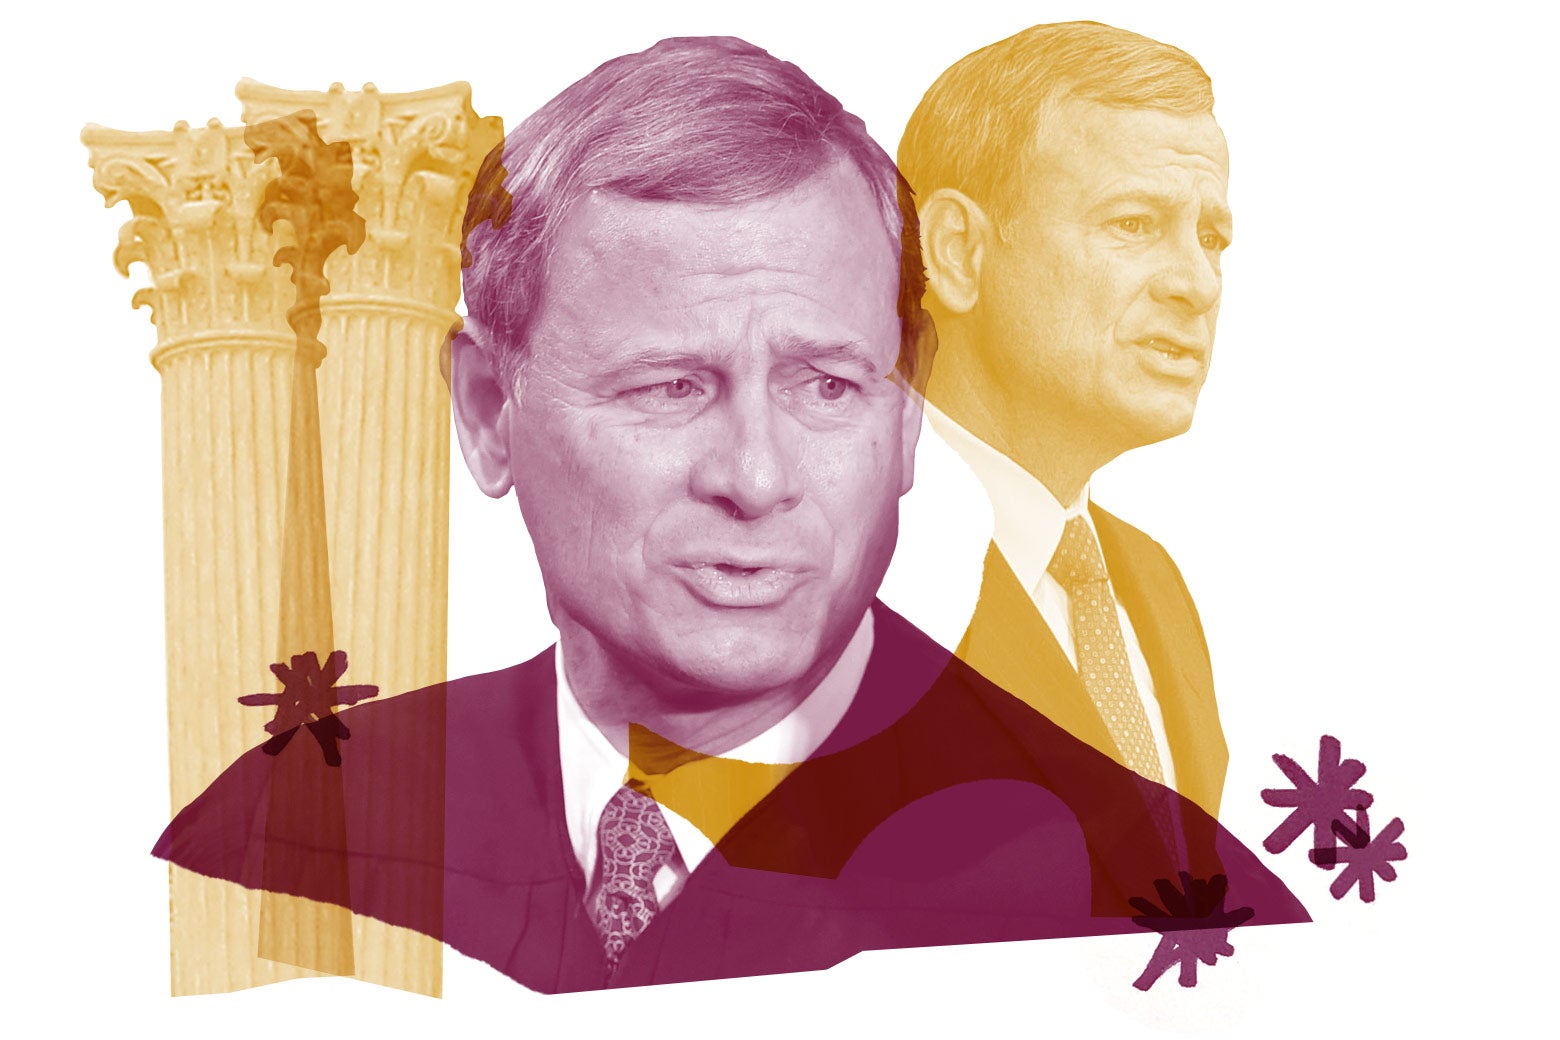 Collage of Chief Justice John Roberts and columns from the Supreme Court building.